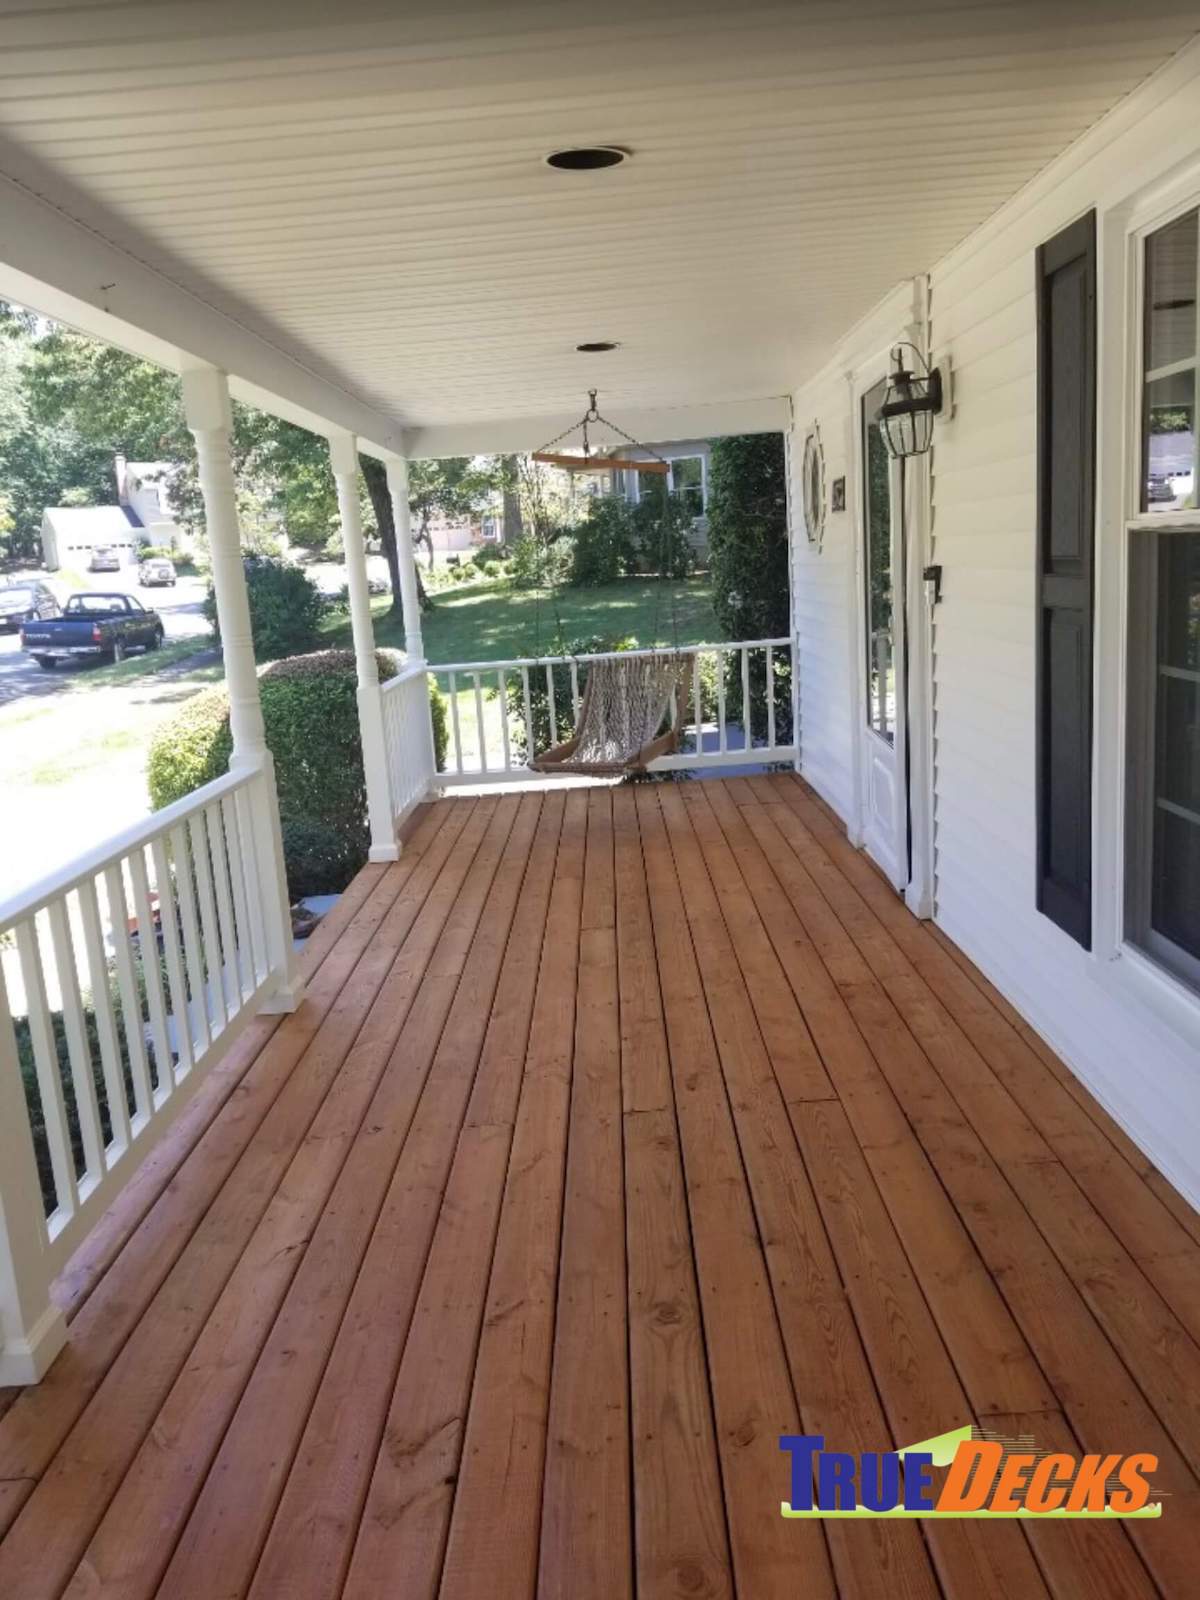 1 Deck - Expectations For Wood Stain: Realistic Expectations Deck Stain